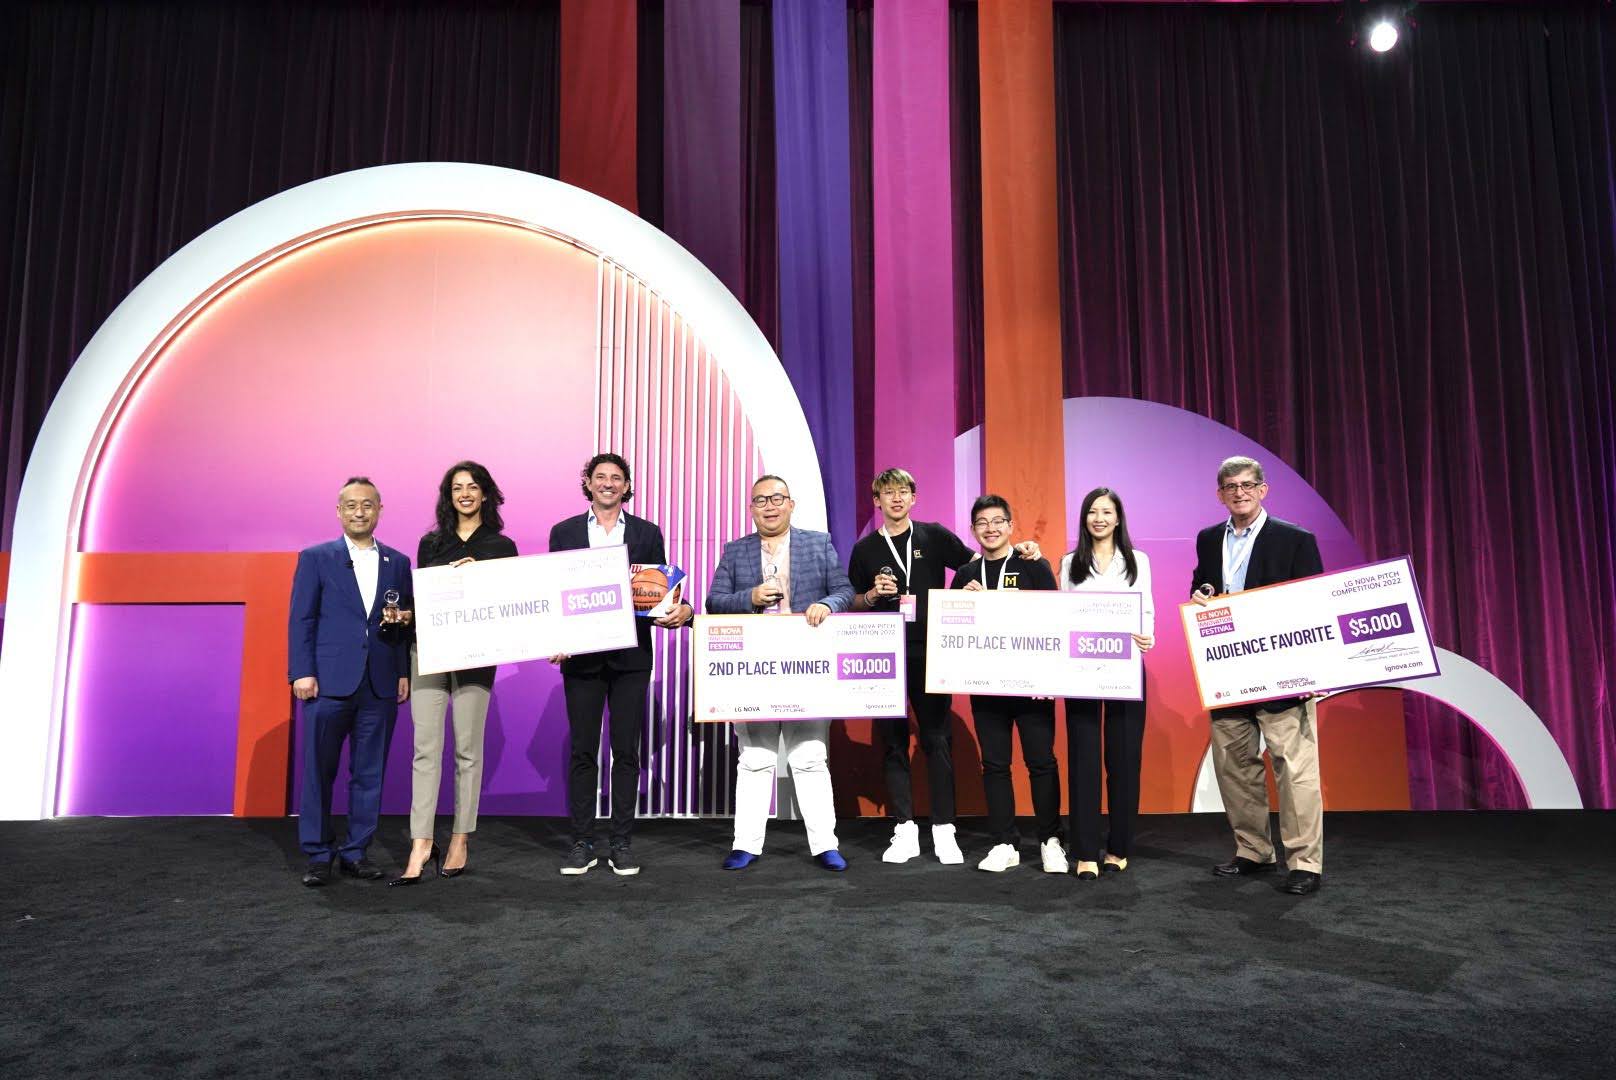 Left to Right, Dr. Sokwoo Rhee from LG NOVA, Parsoua Shirzad and Andriyko Herchak of Trendi, Keith Loo of Skinopathy, Richard Wang, Diane Guo and Oscar Guo of Metalistings, and David Blaszkowsky of Helios Data, Startup competition winners at the LG NOVA Innovation Festival